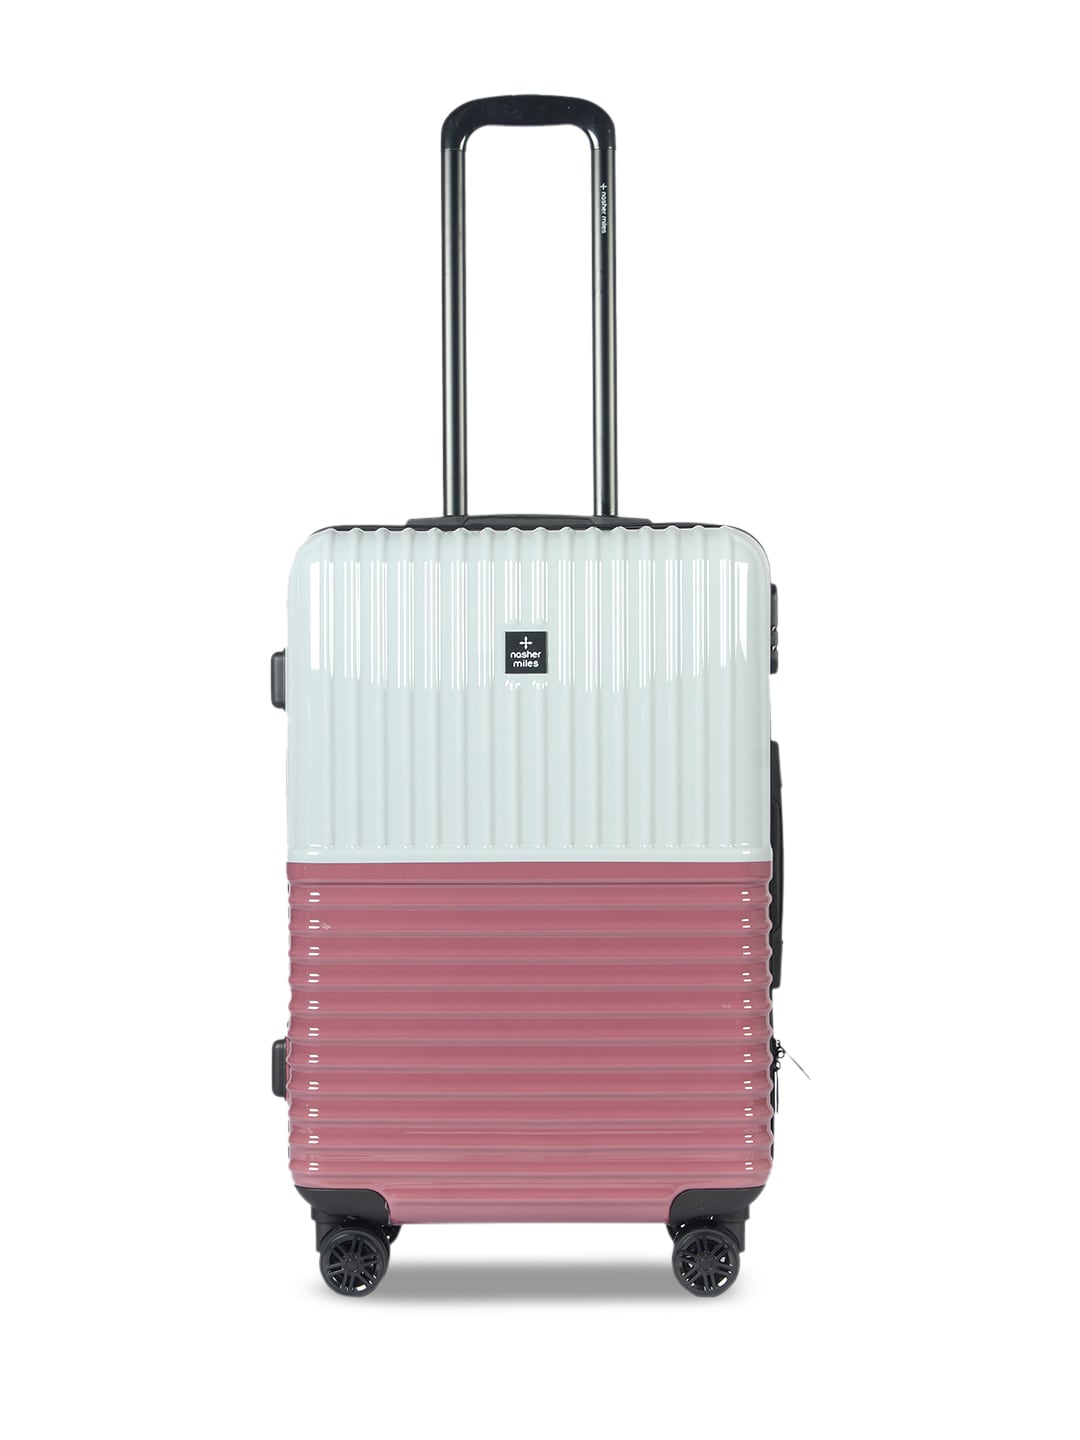 Nasher Miles Rose Gold-Toned & Silver-Toned Colourblocked Istanbul Hard-Sided Medium Trolley Suitcase Price in India